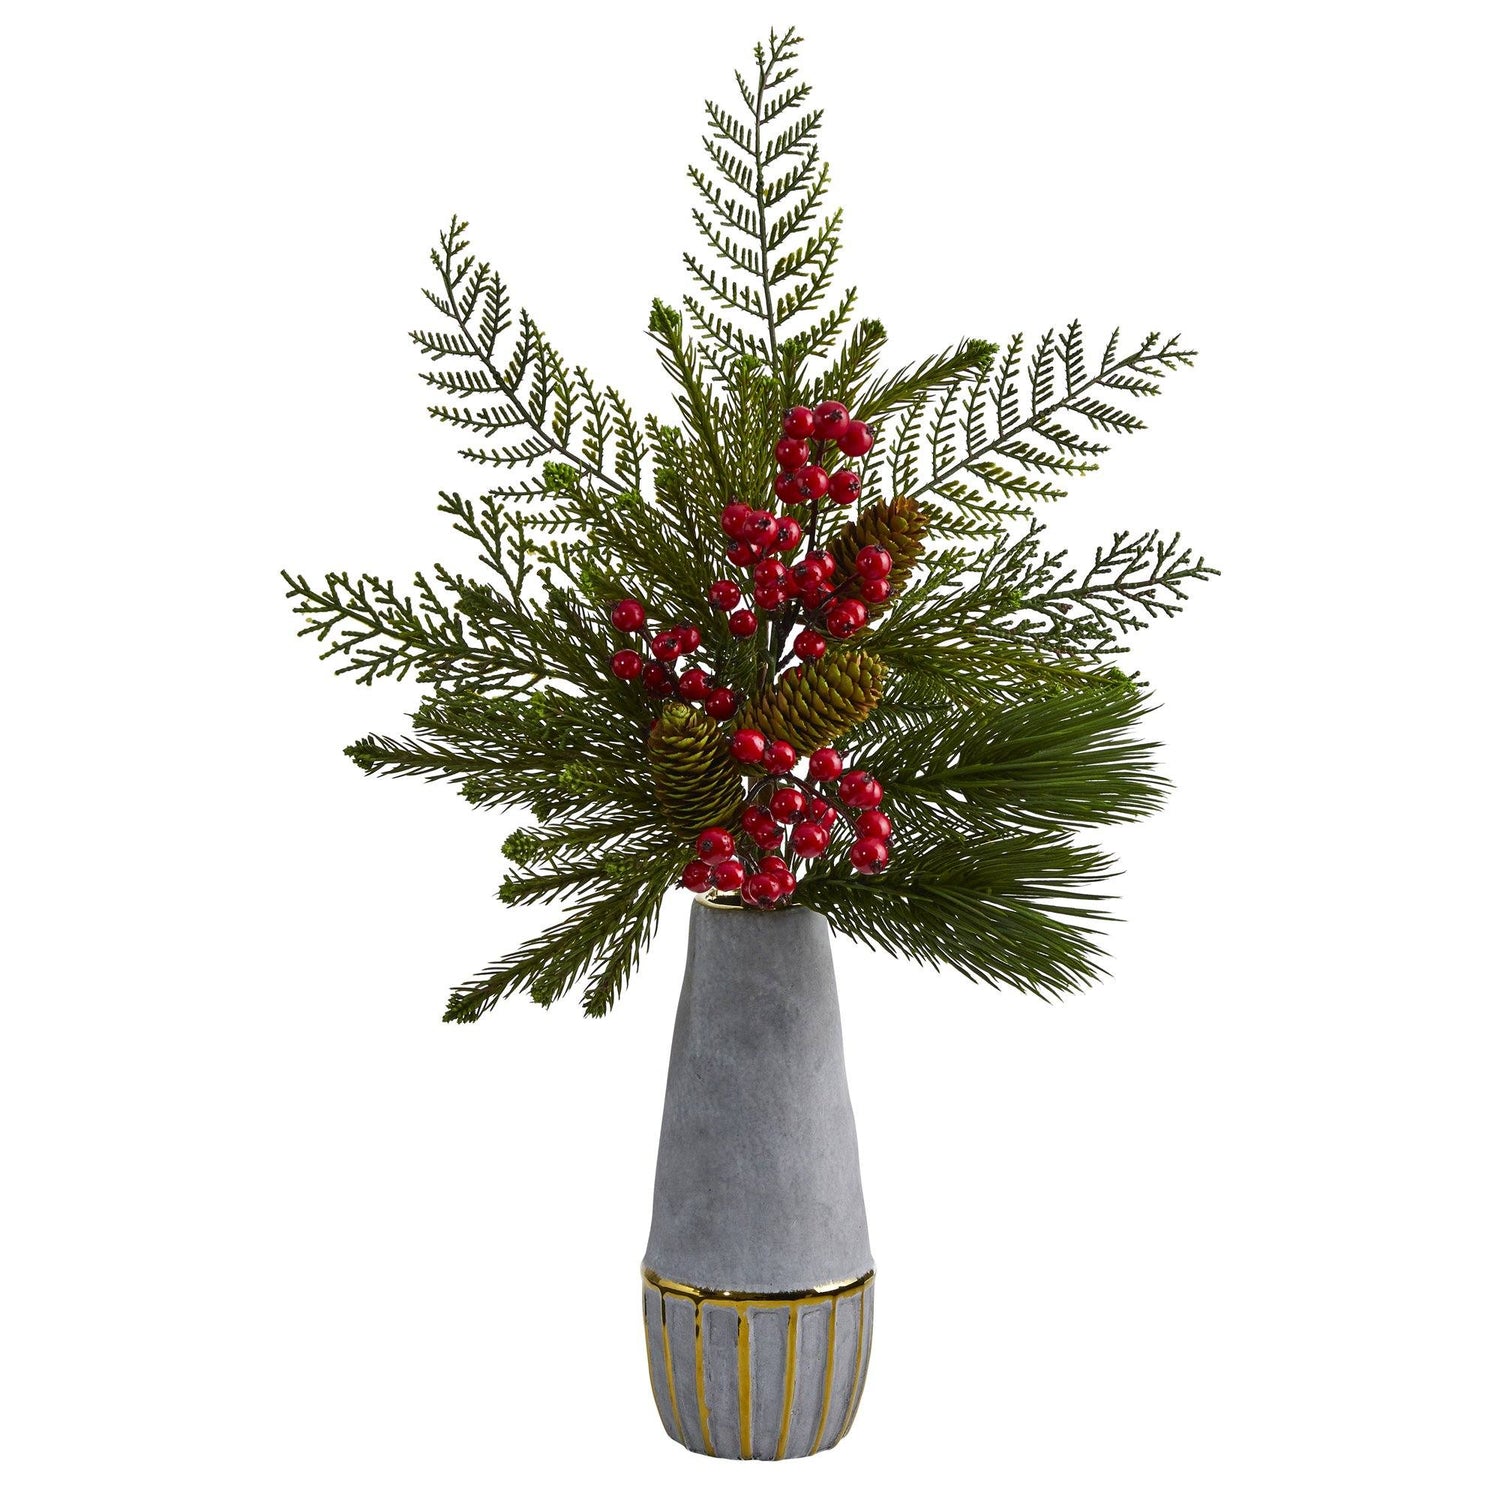 24” Mixed Pine, Pinecone and Berry Artificial Arrangement in Stoneware Vase with Gold Trimming